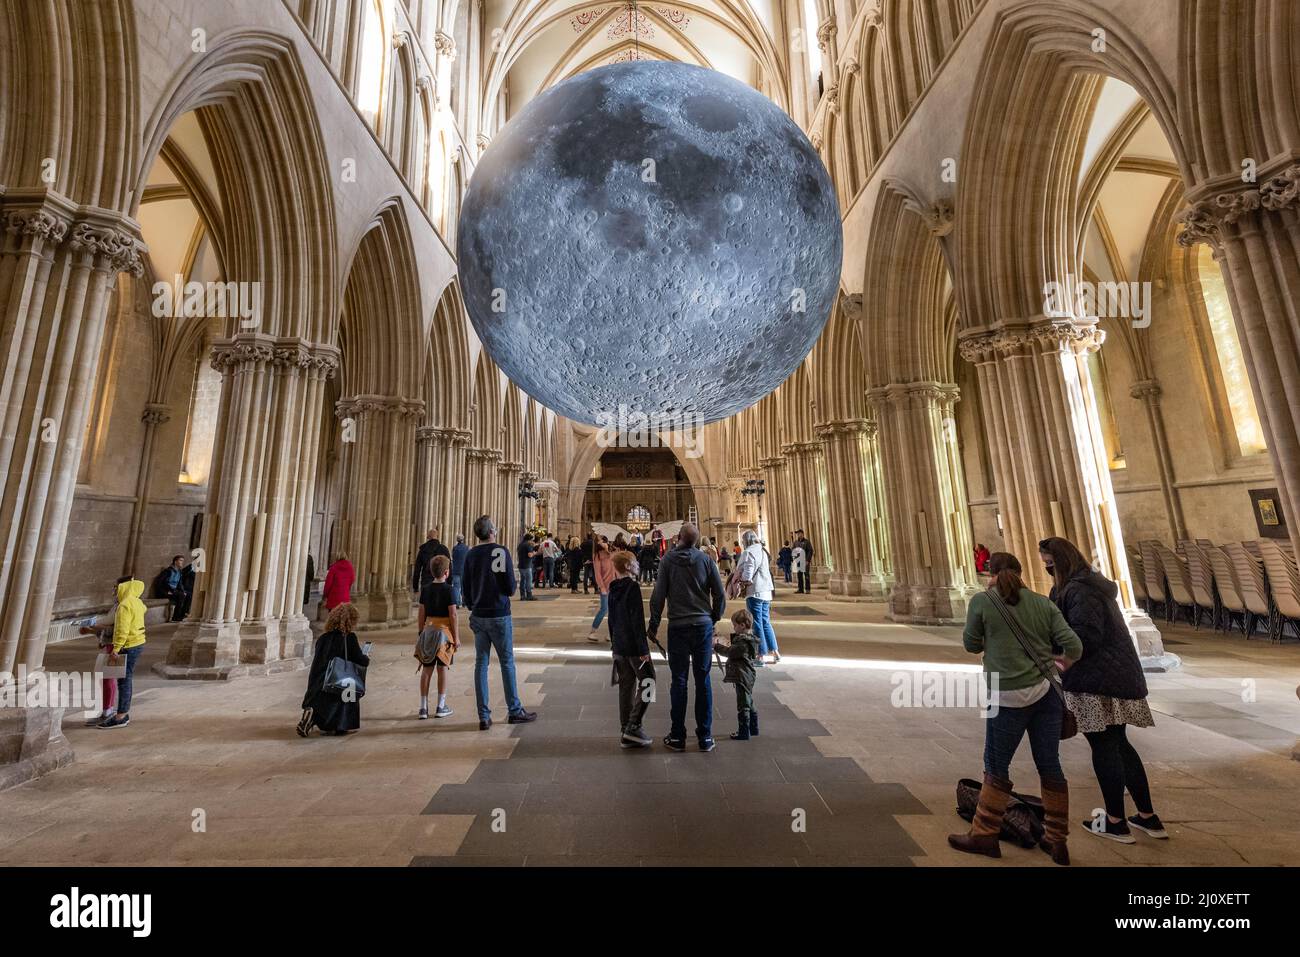 A seven-metre wide sculpture by Luke Jerram of the moon on display inside Wells Cathedral, Wells, Somerset, UK Stock Photo